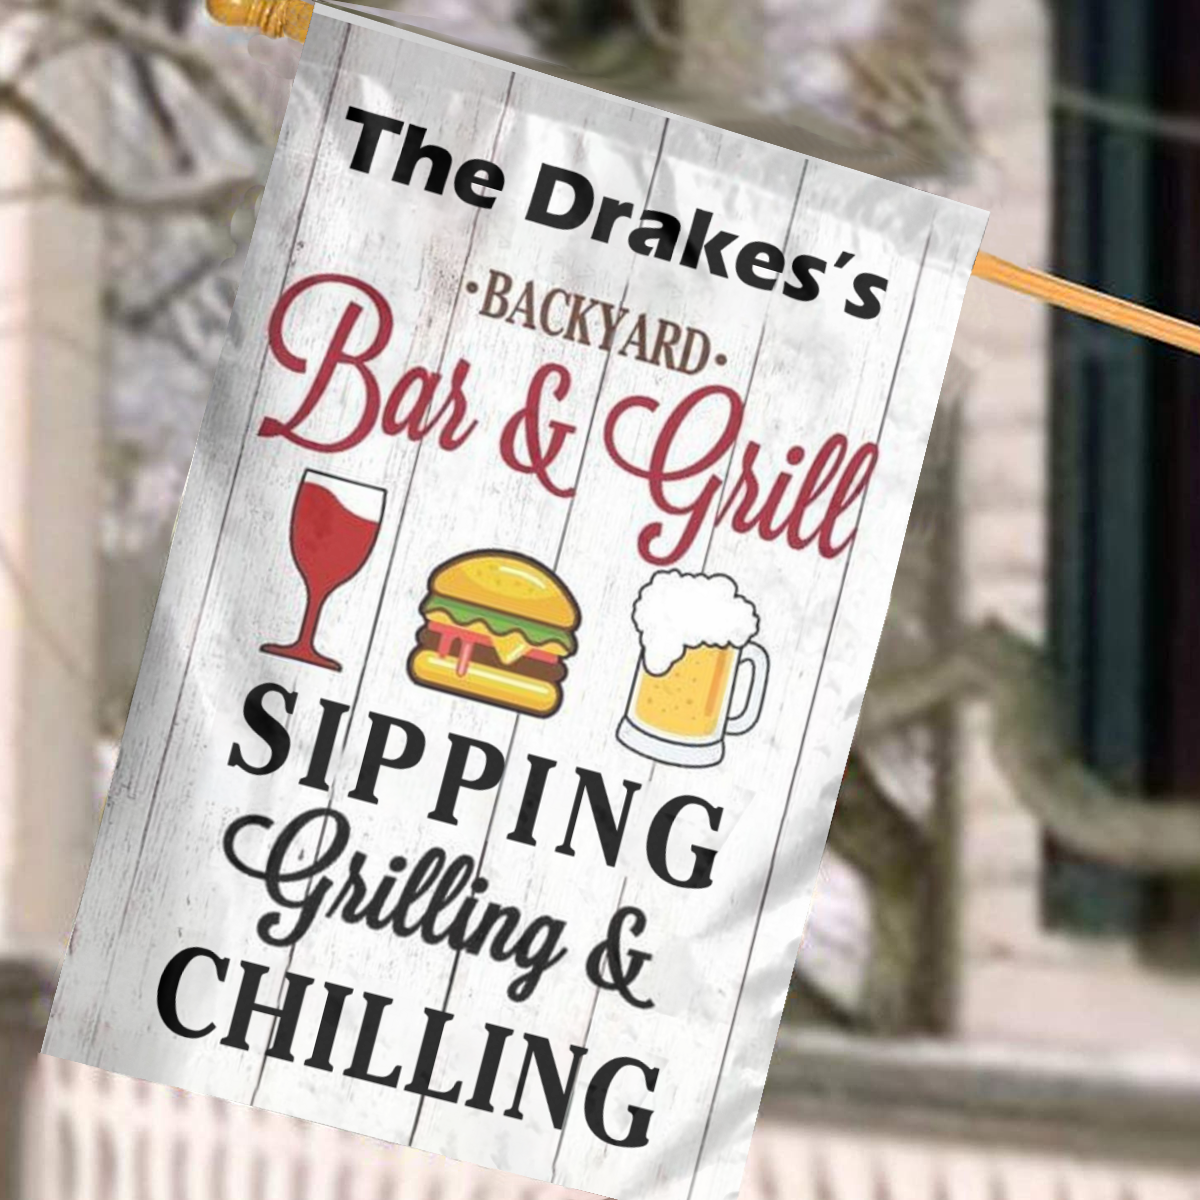 Customized Name Backyard Bar And Grill Sipping Grilling & Chilling Garden Flag No.TZ8WVH